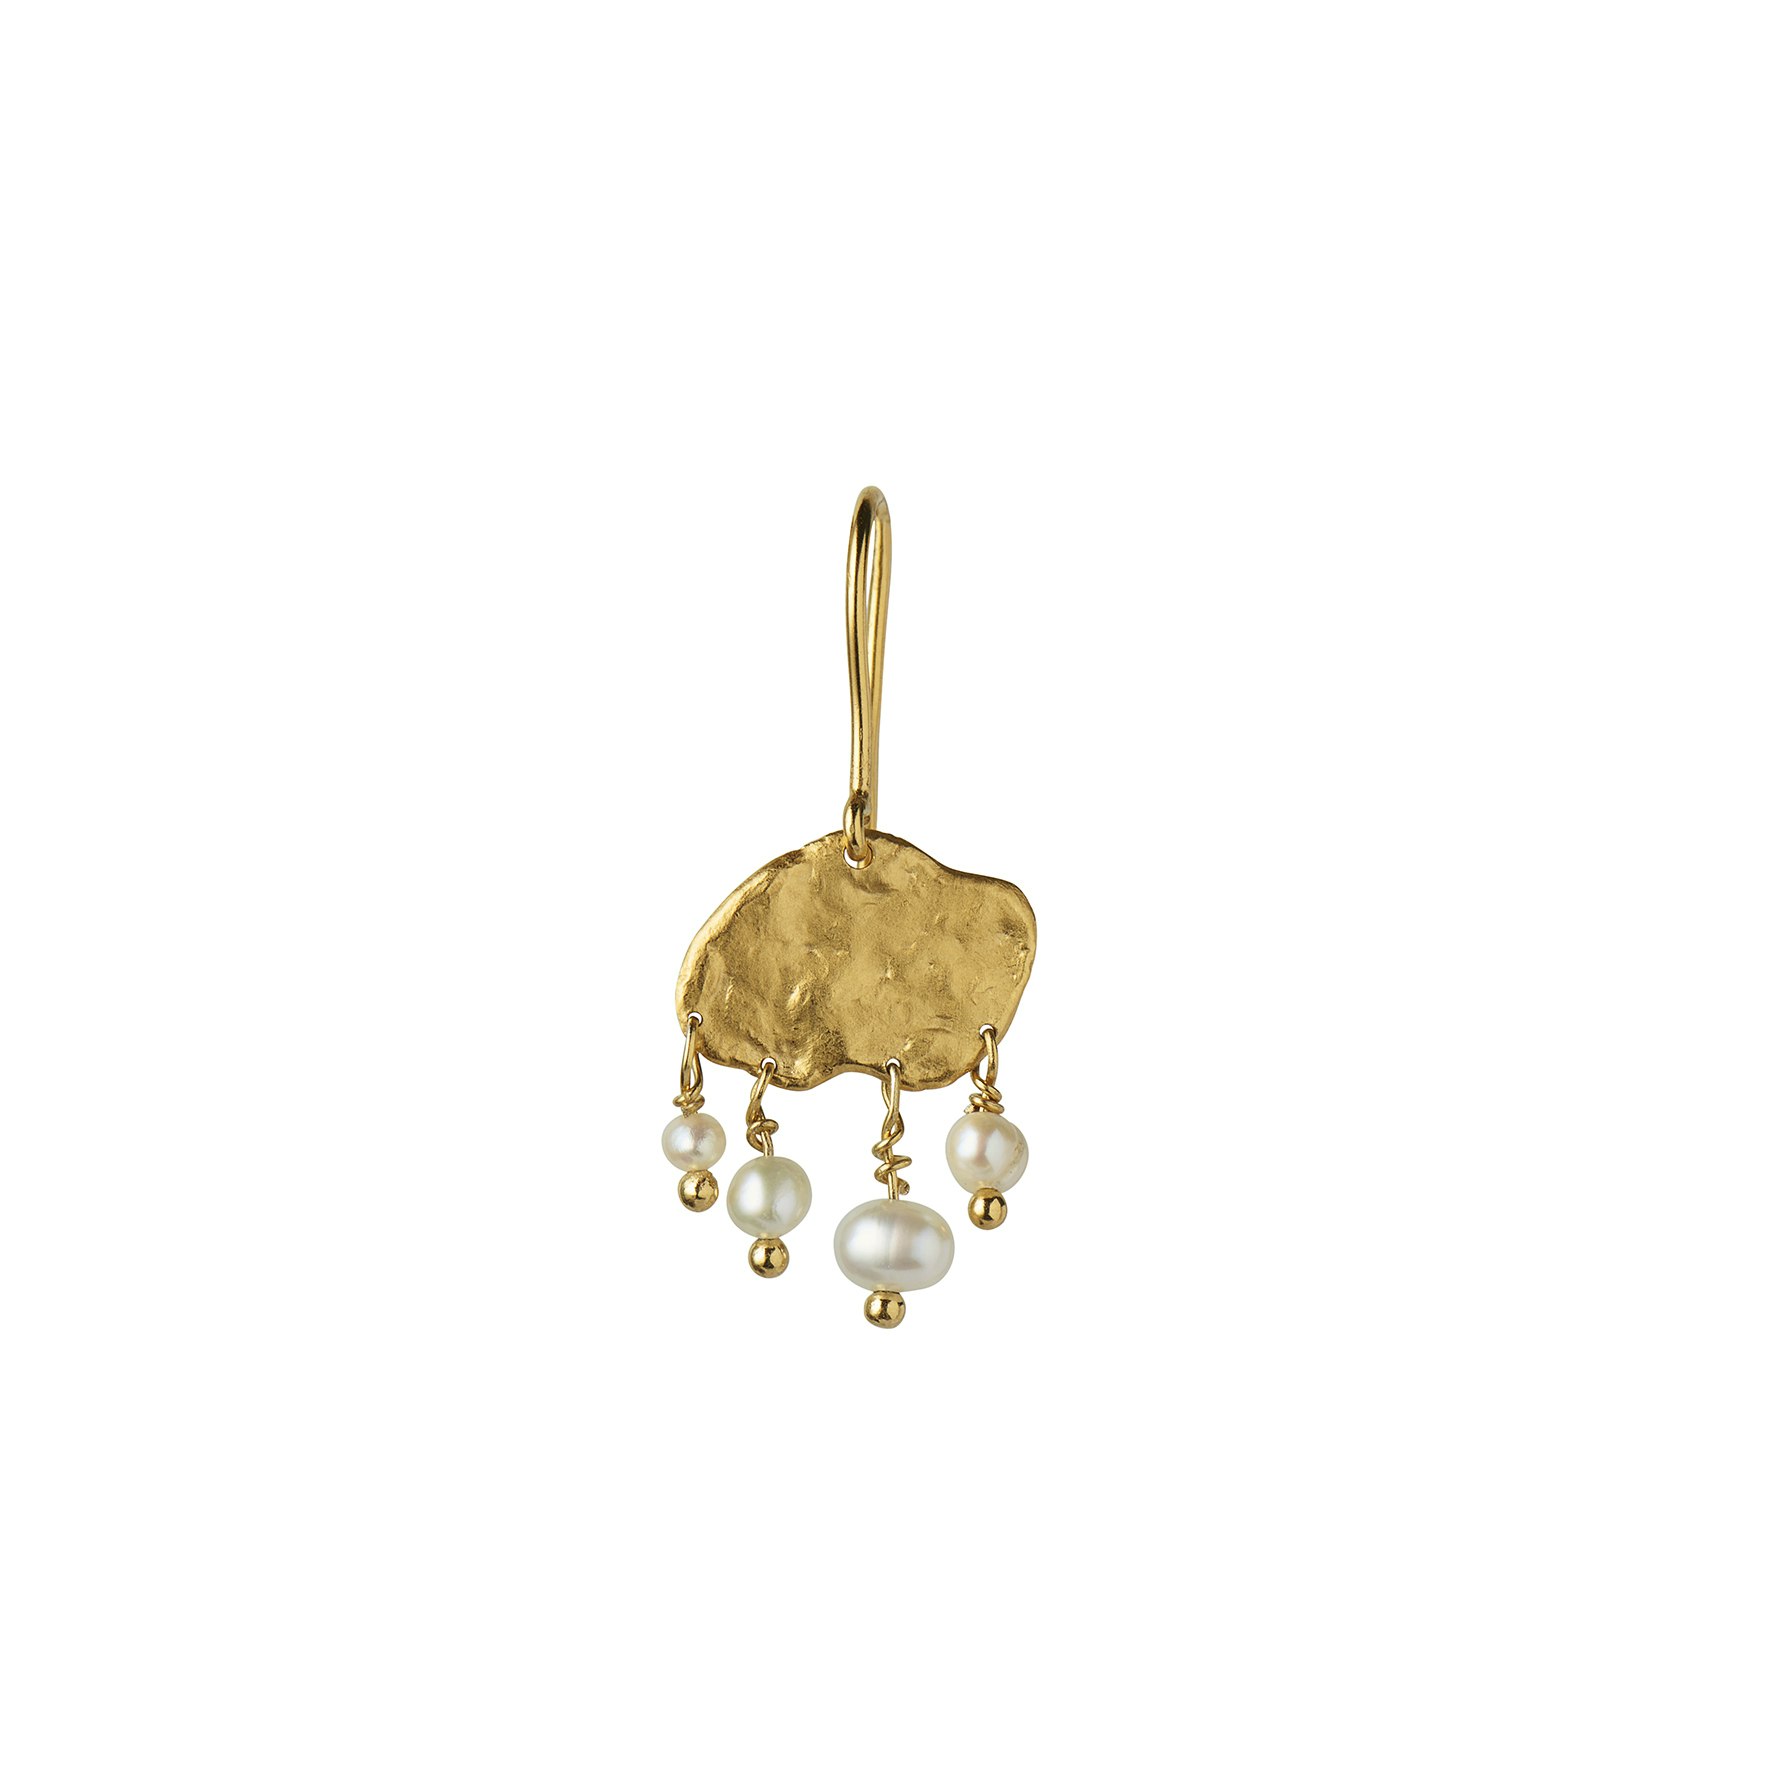 Big Gold Splash Earring – Elegant Pearls from STINE A Jewelry in Goldplated Silver Sterling 925